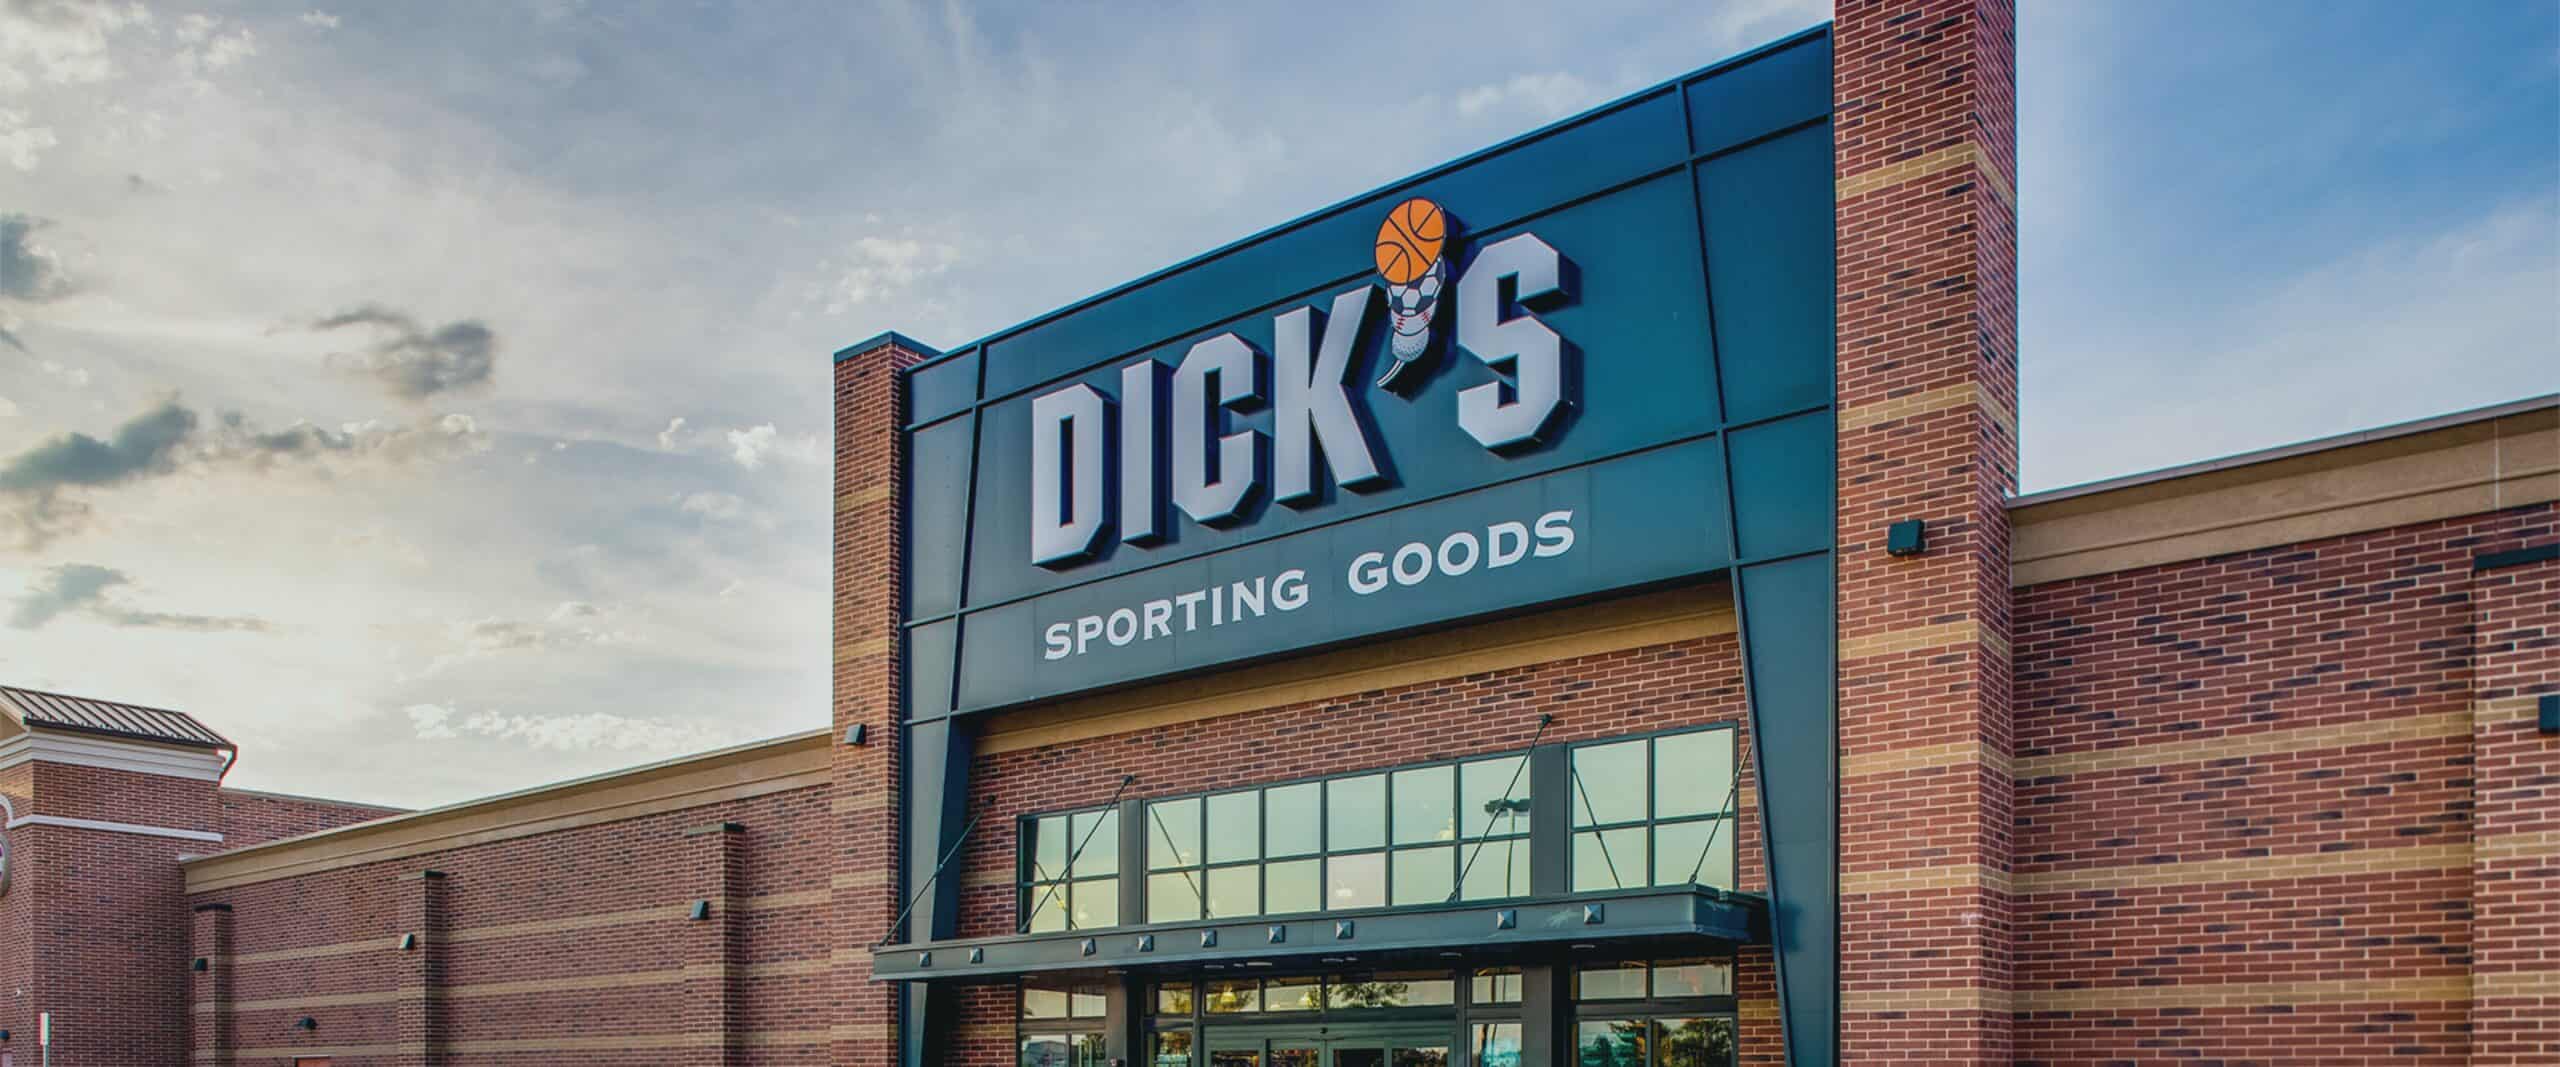 Renovo Construction built Dick's Sporting Goods showing fascia and signage on a brown brick open air mall